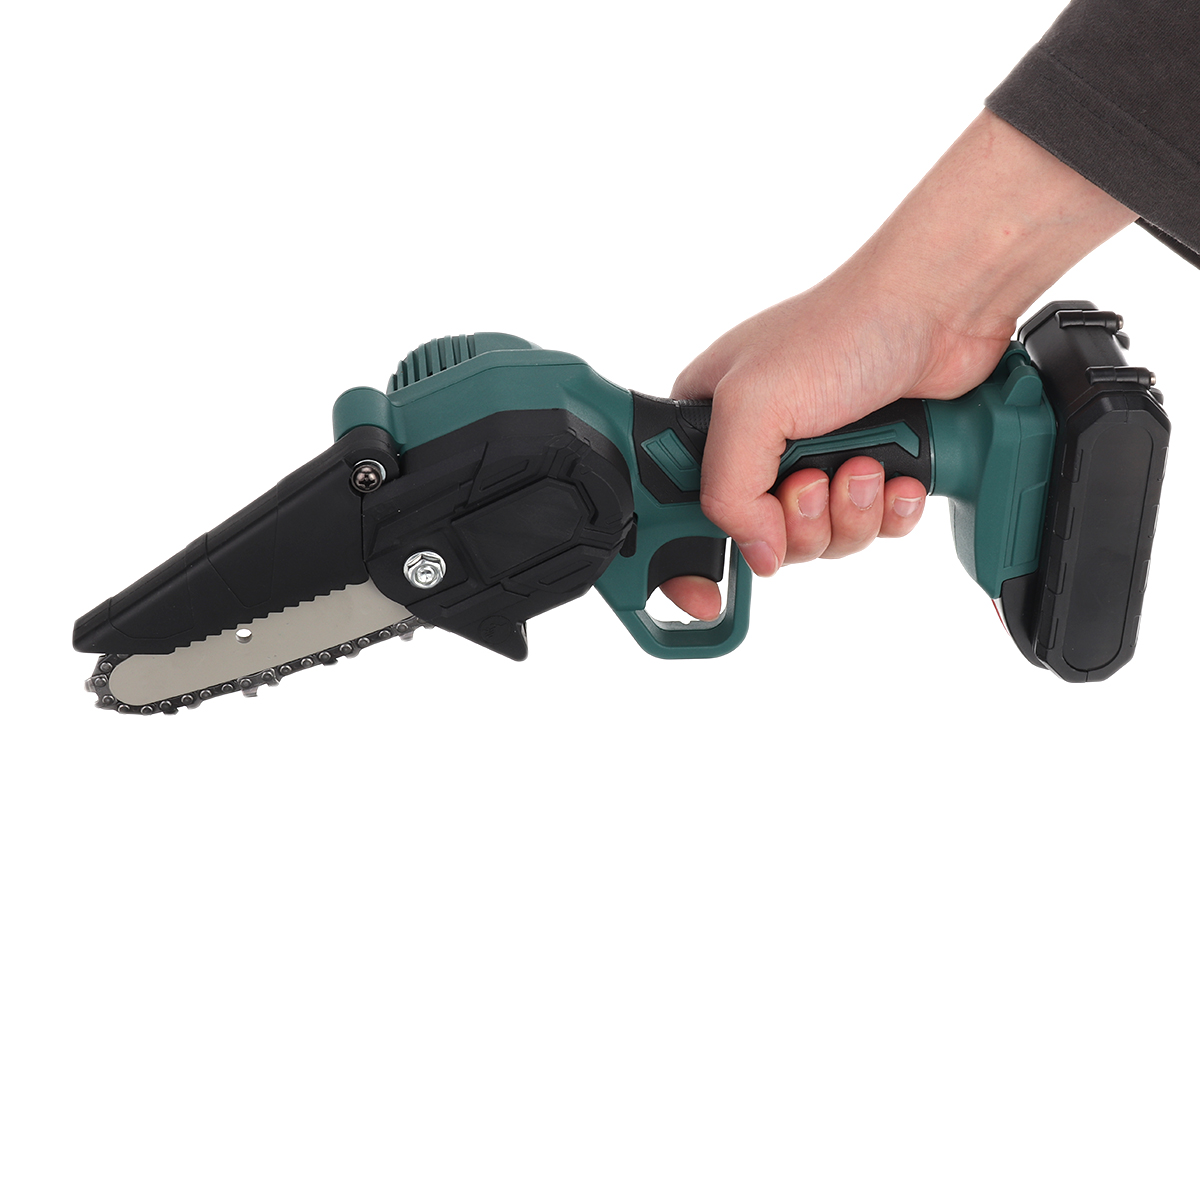 4-Inch-Cordless-Electric-Pruning-Saw-Rechargeable-One-handed-Woodworking-Tool-Mini-Chain-Saw-For-Woo-1850641-3